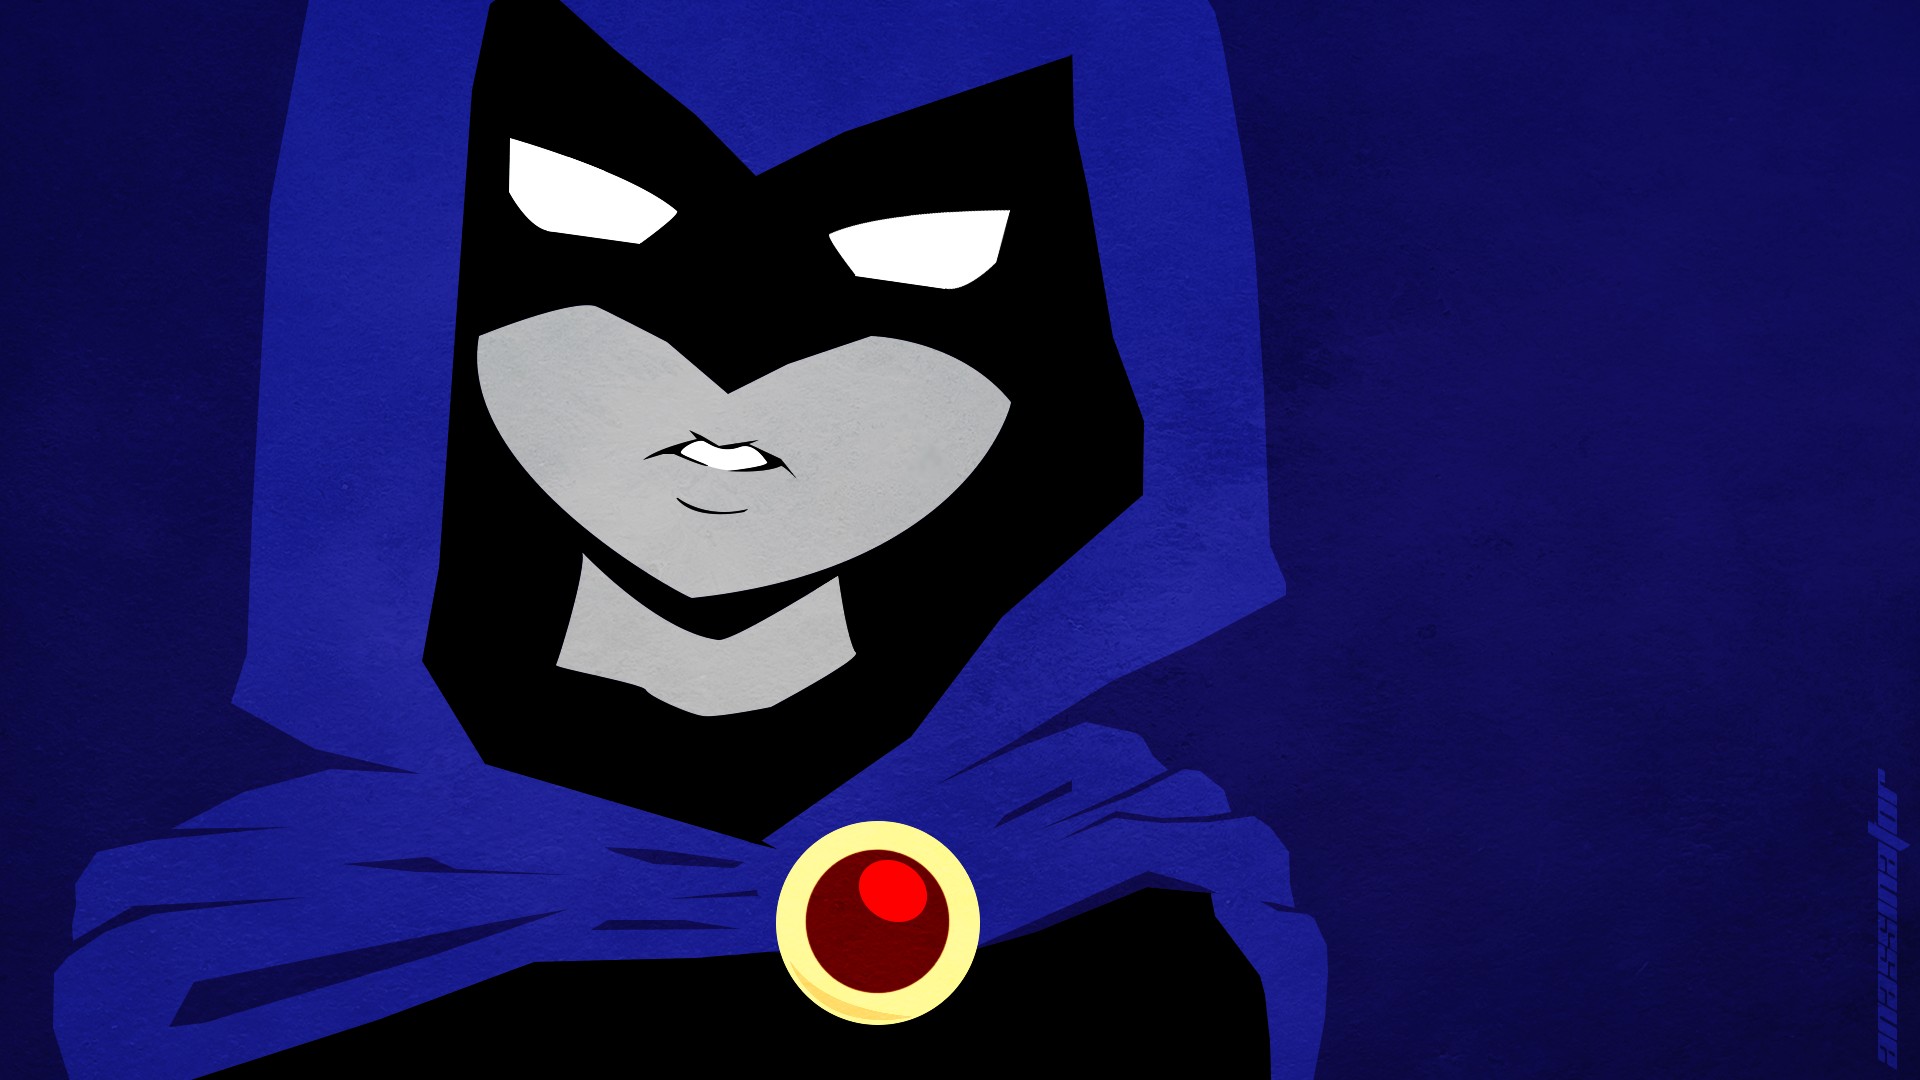 7. Raven from Teen Titans - wide 8